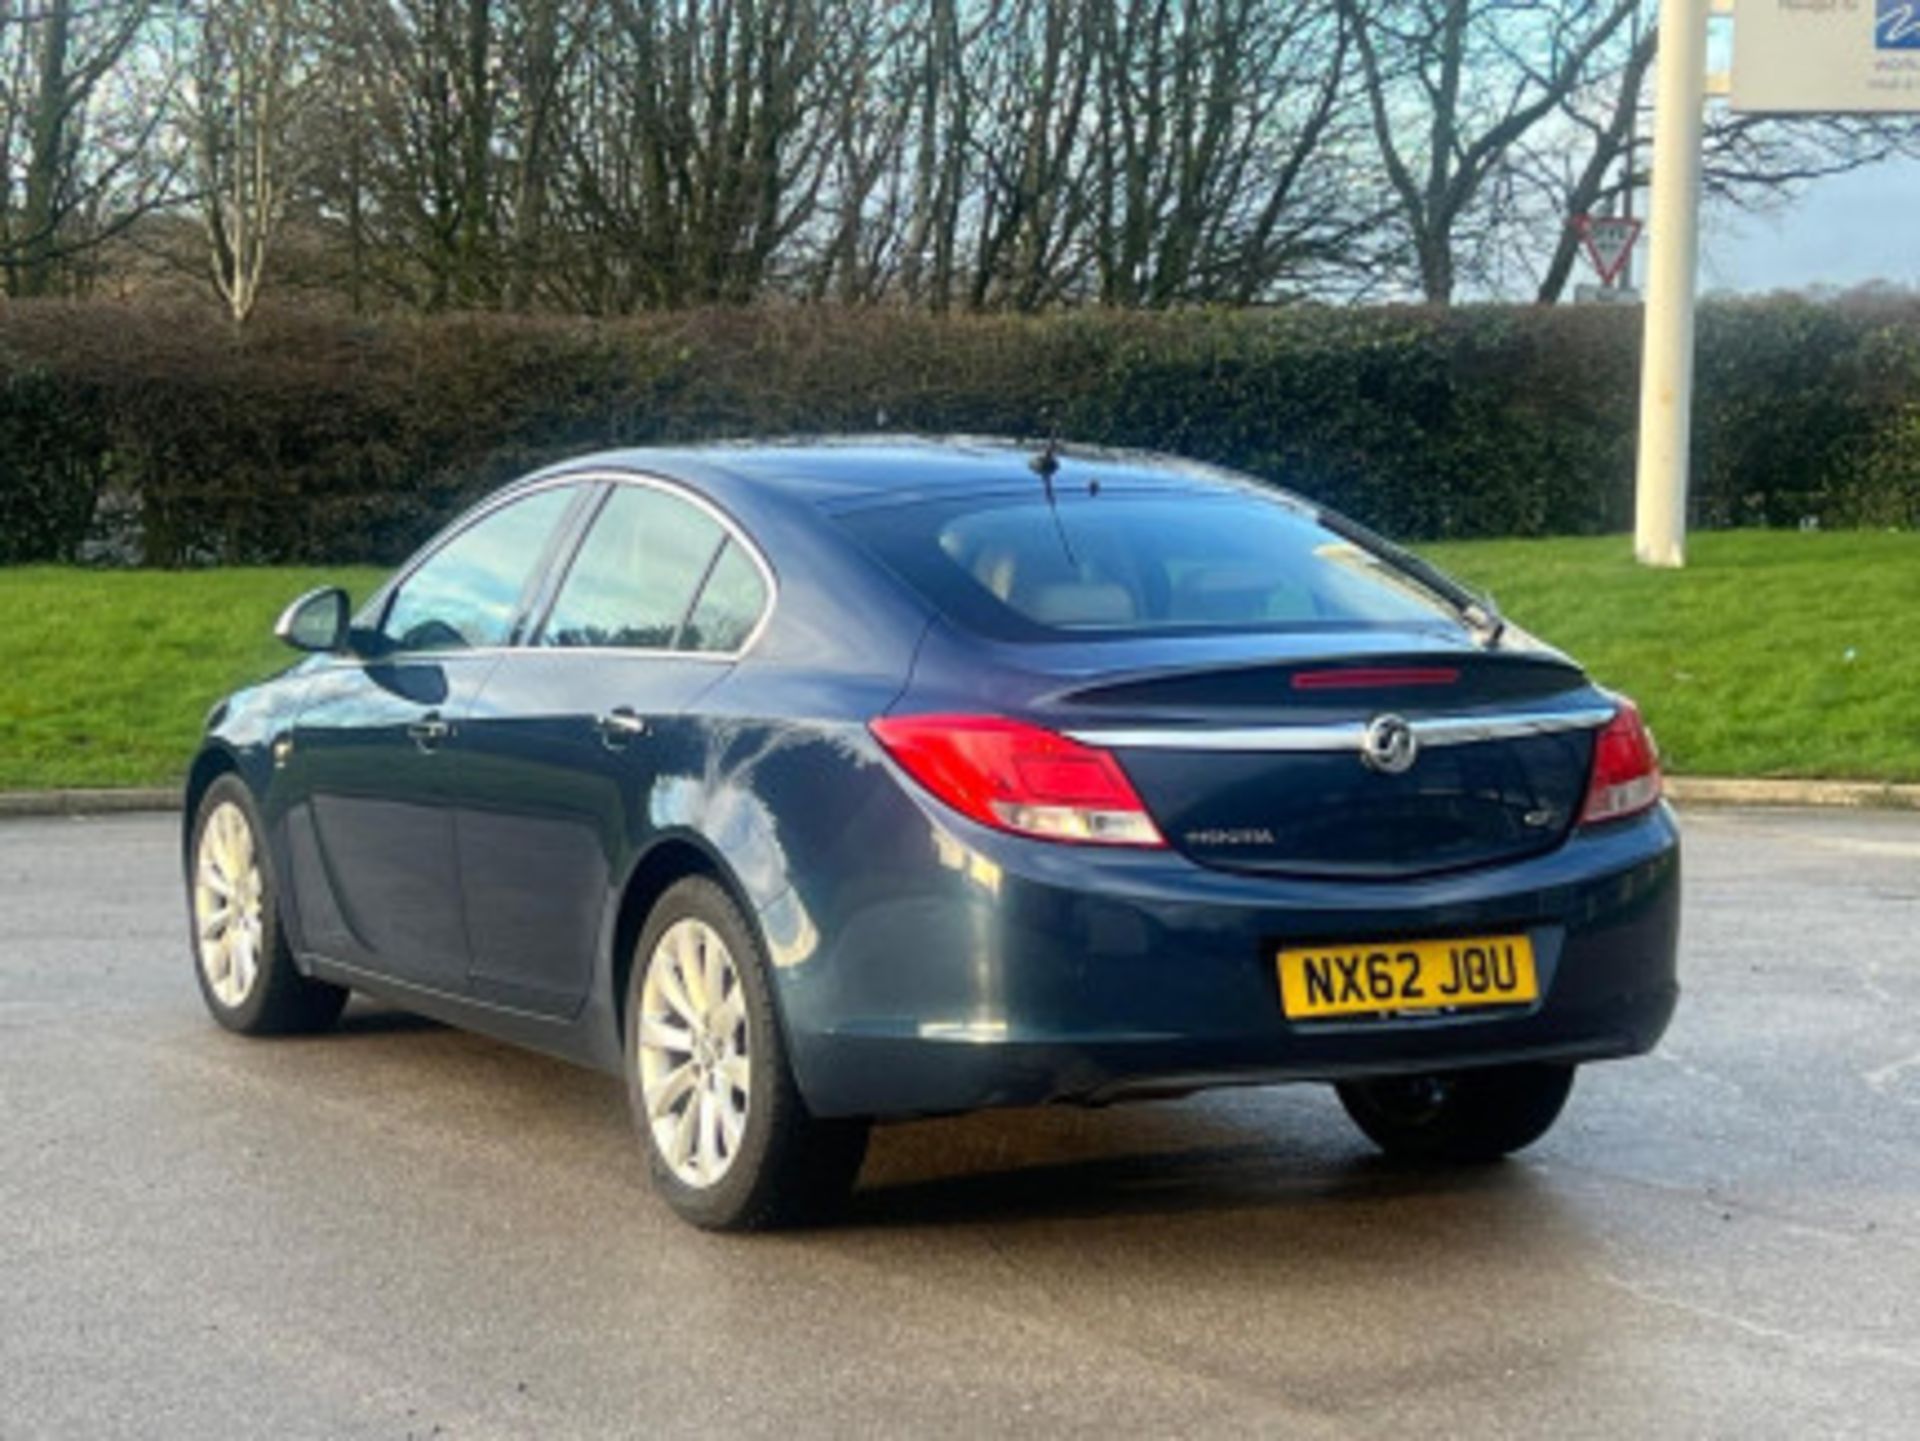 2012 VAUXHALL INSIGNIA 2.0 CDTI ELITE AUTO EURO 5 - DISCOVER EXCELLENCE >>--NO VAT ON HAMMER--<< - Image 32 of 79